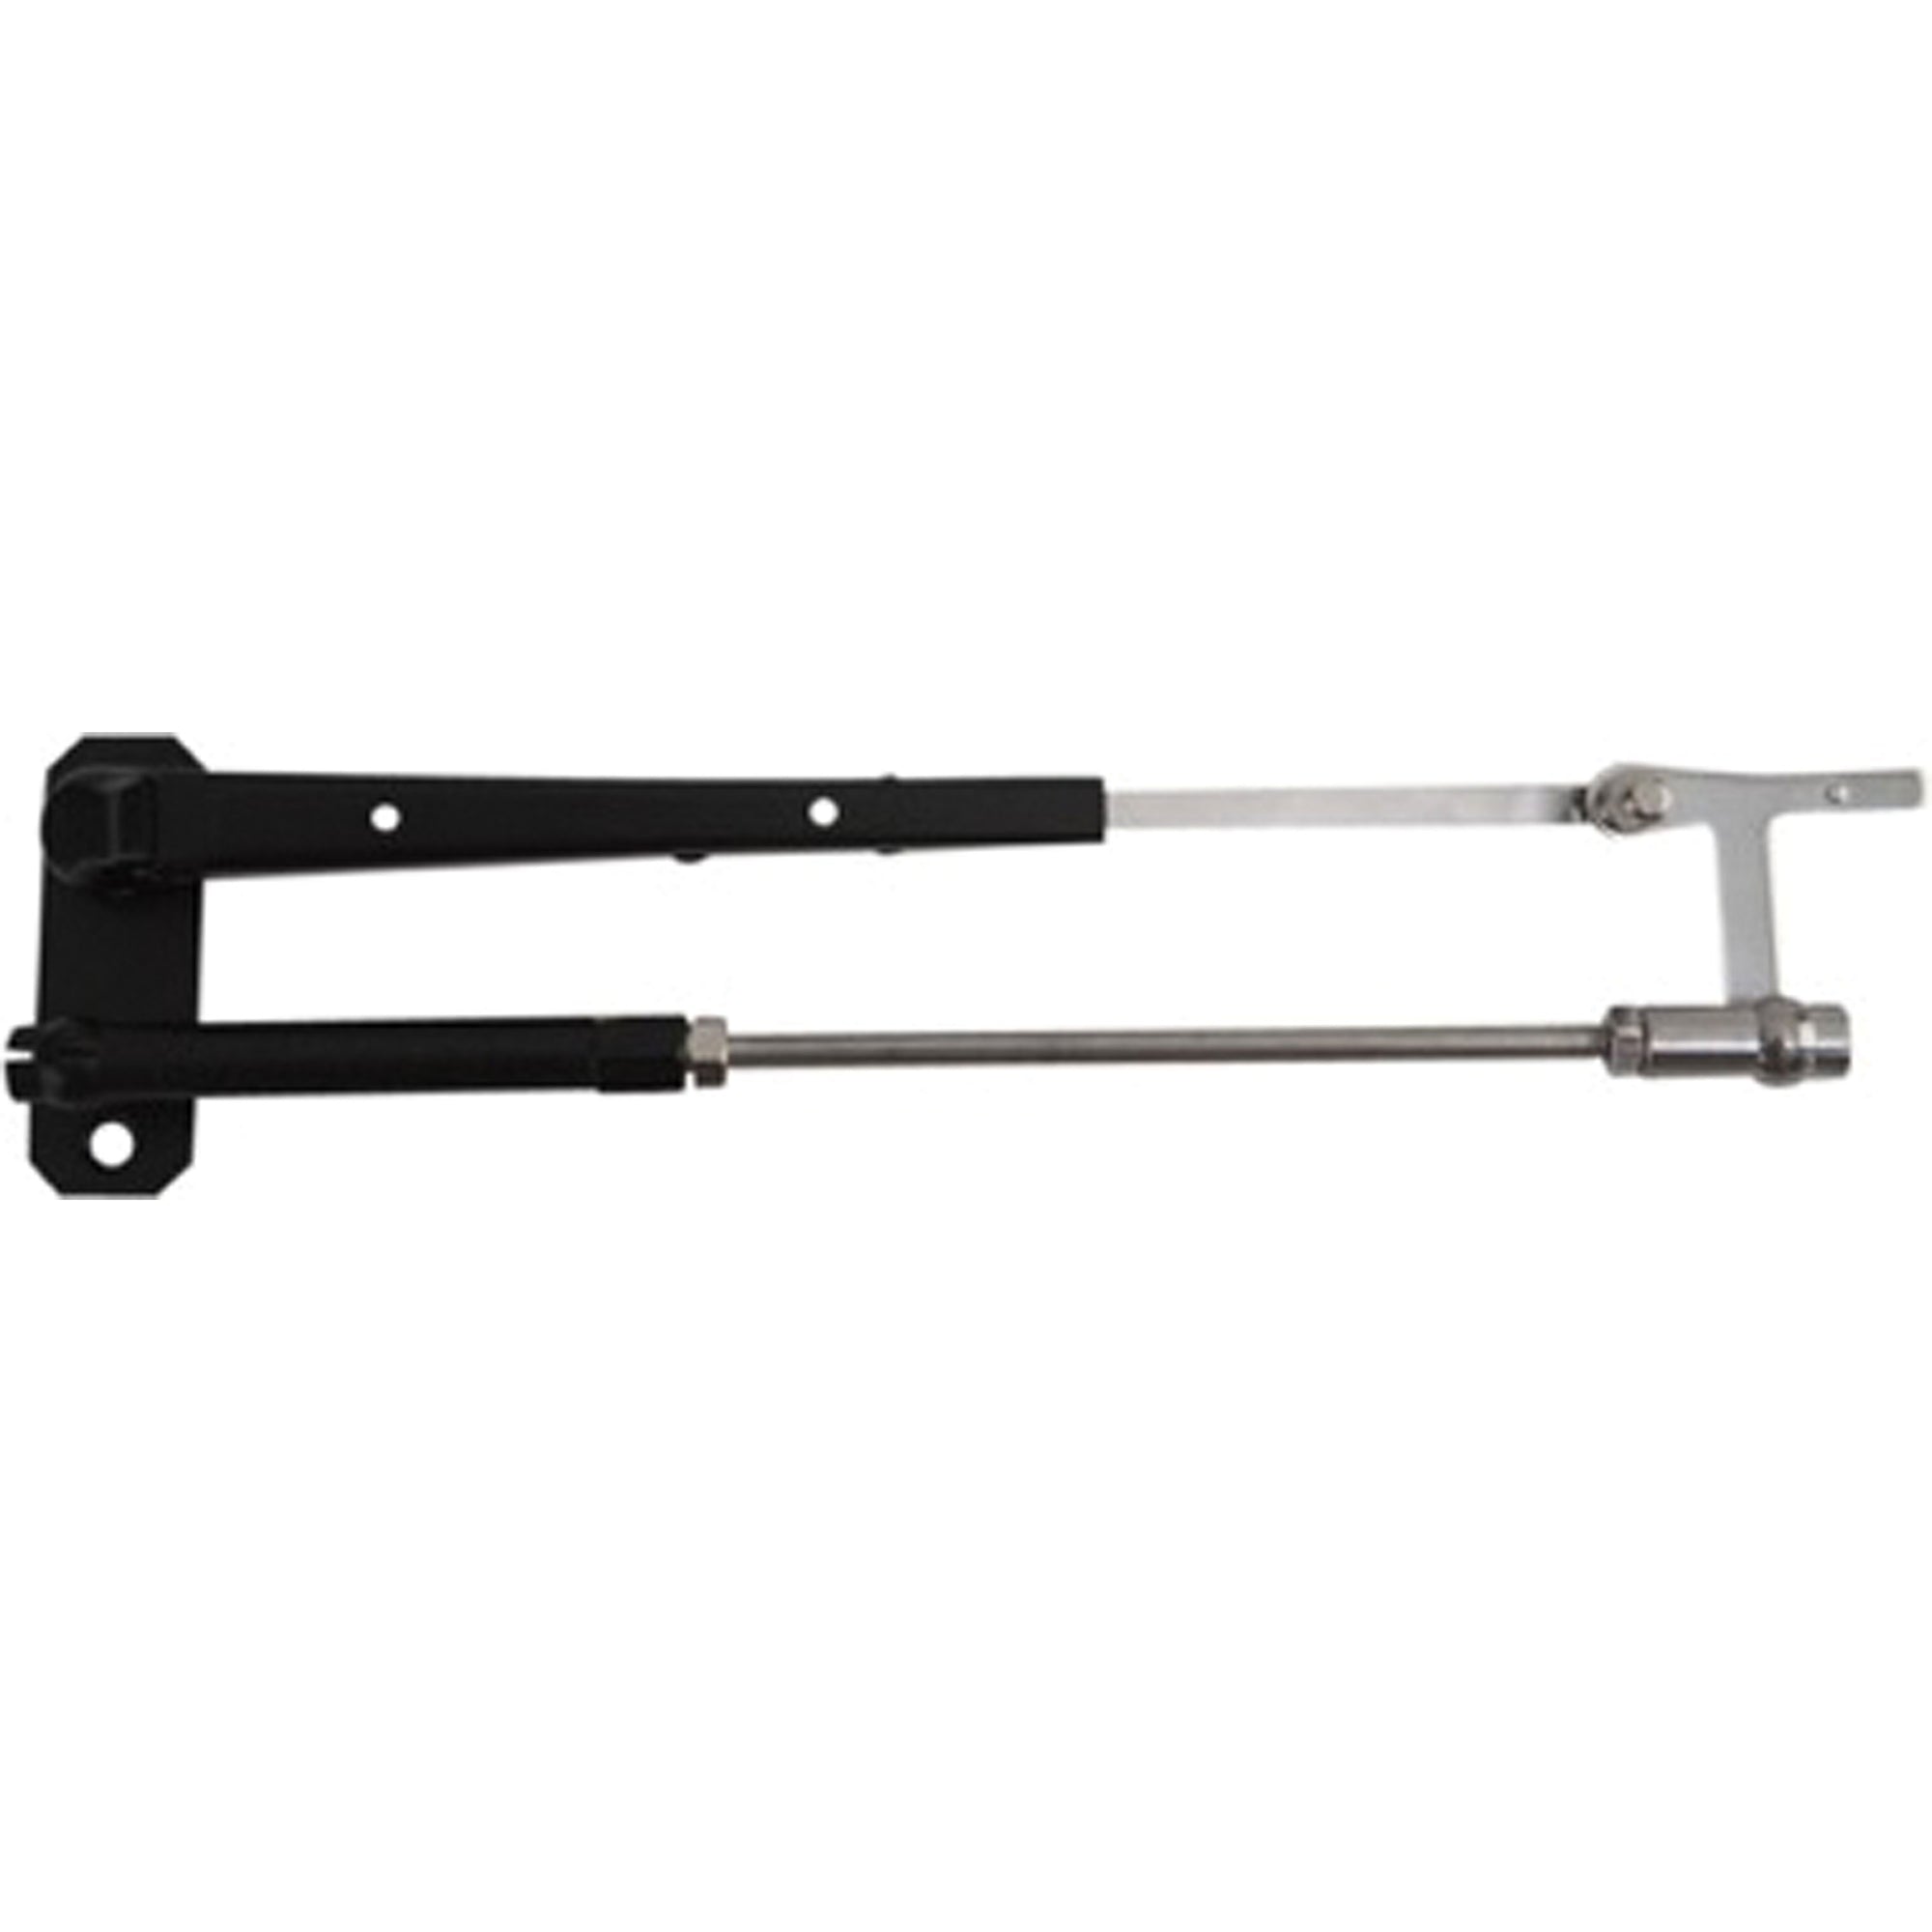 Sea-Dog 413322-1 Adjustable Stainless Steel Pantographic Wiper Arm - 17" to 22"